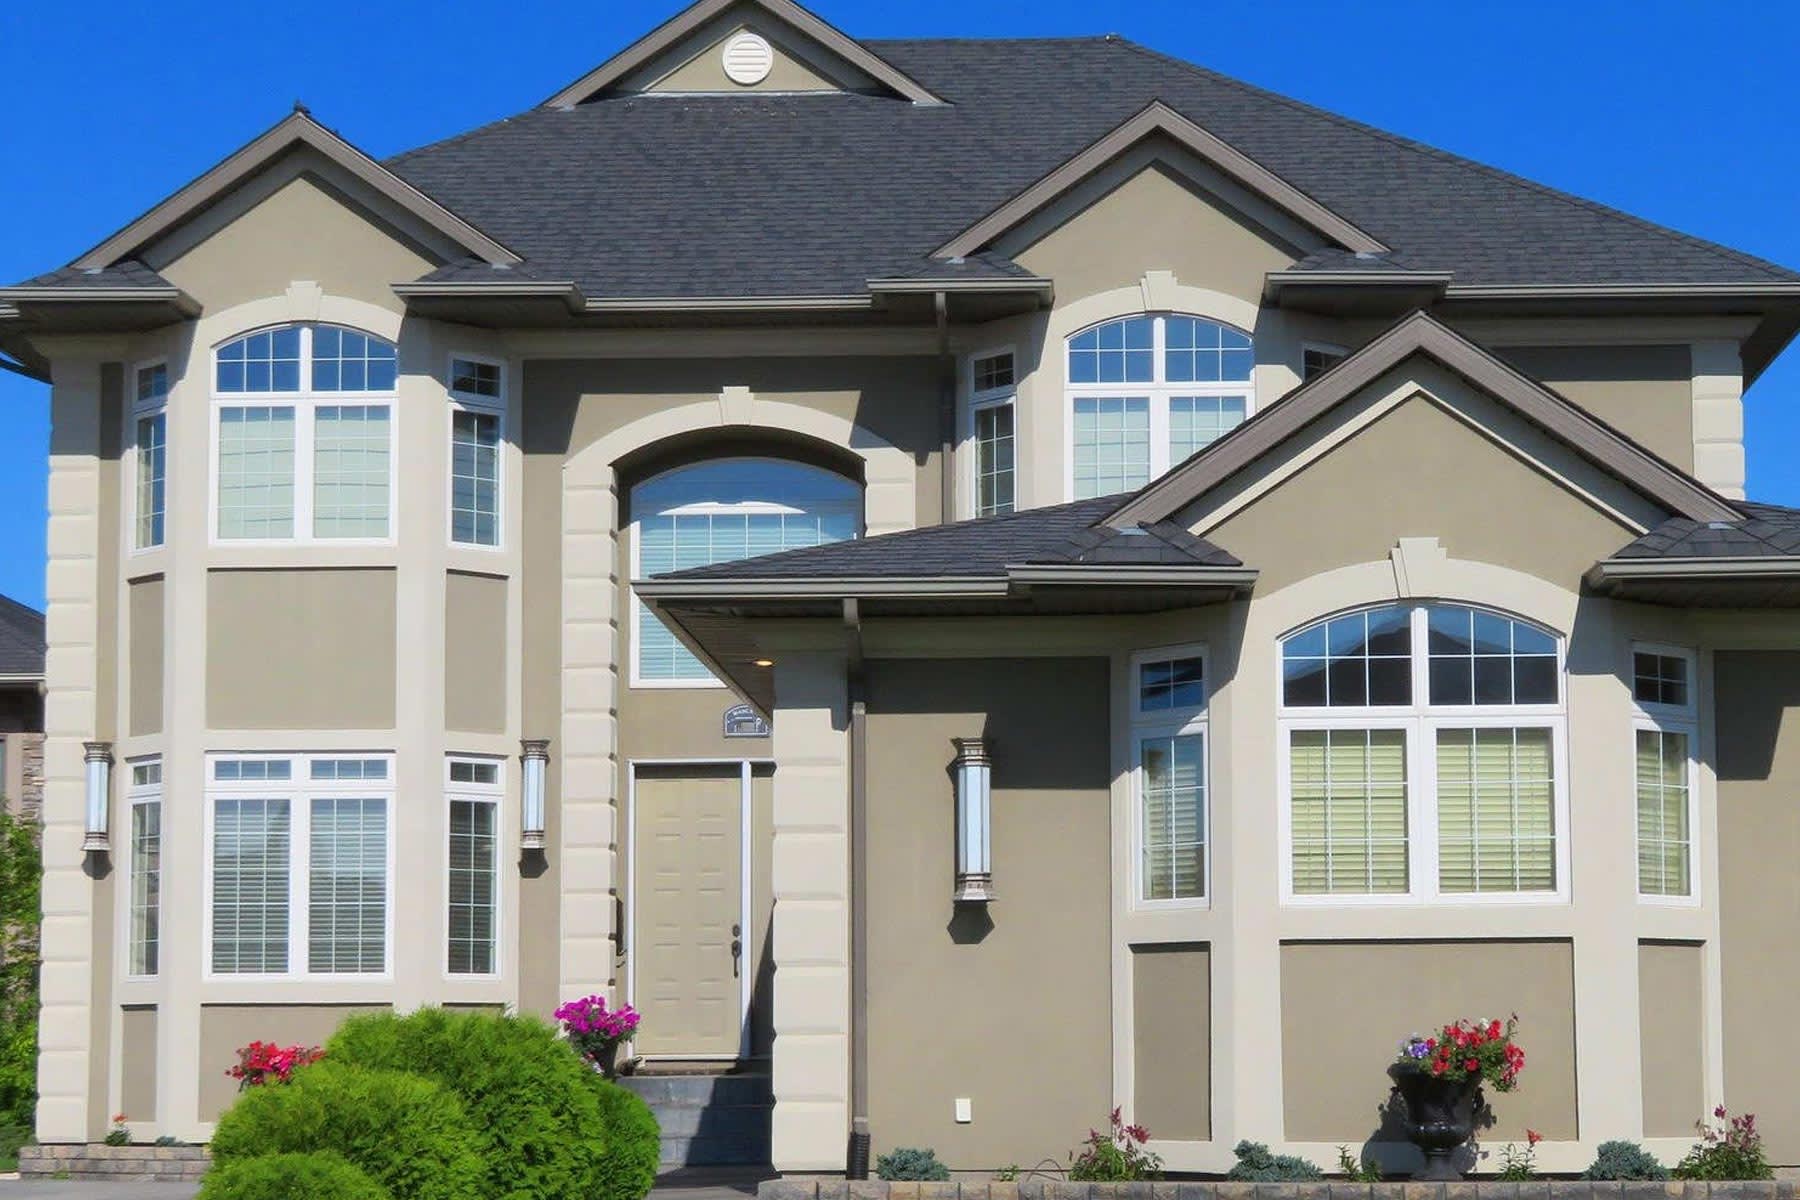 How much does it cost to paint a stucco house?